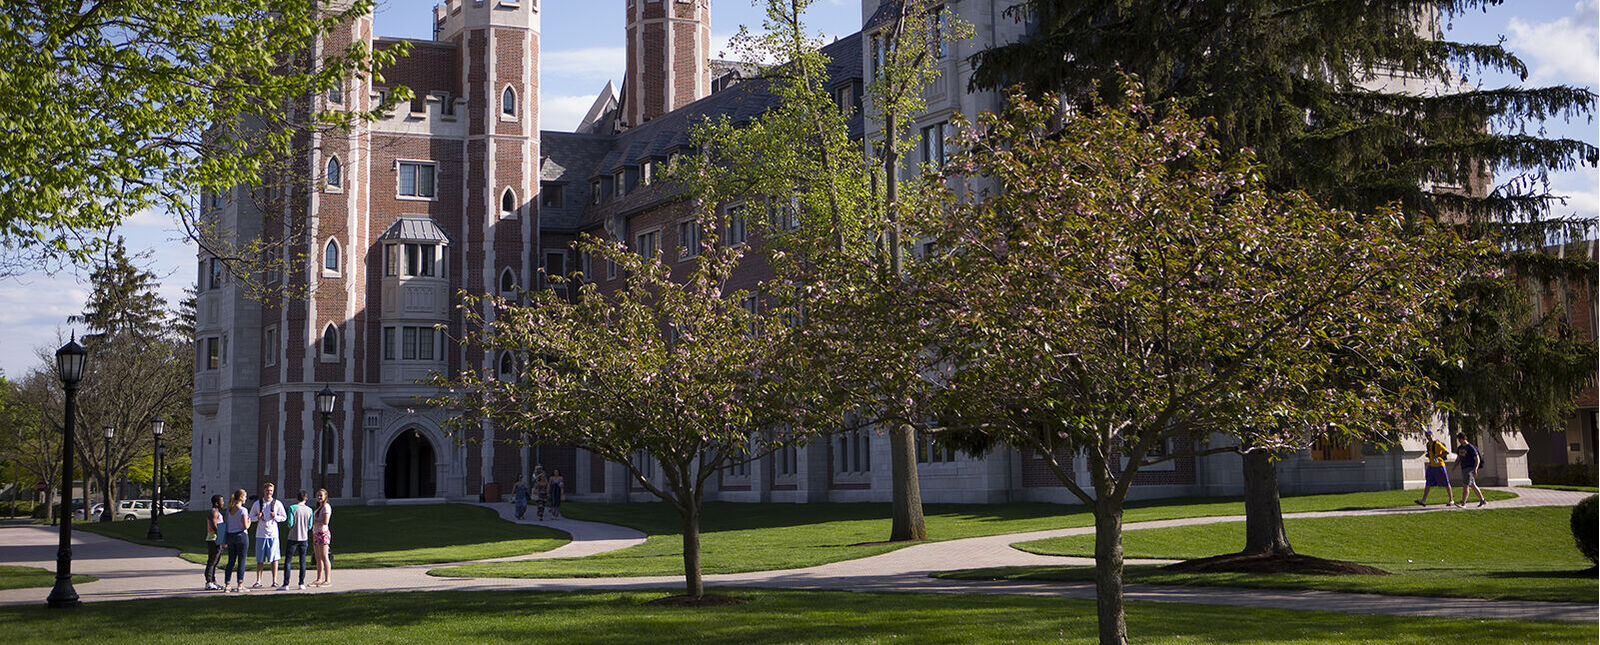 Trees are pictured around Meier Hall